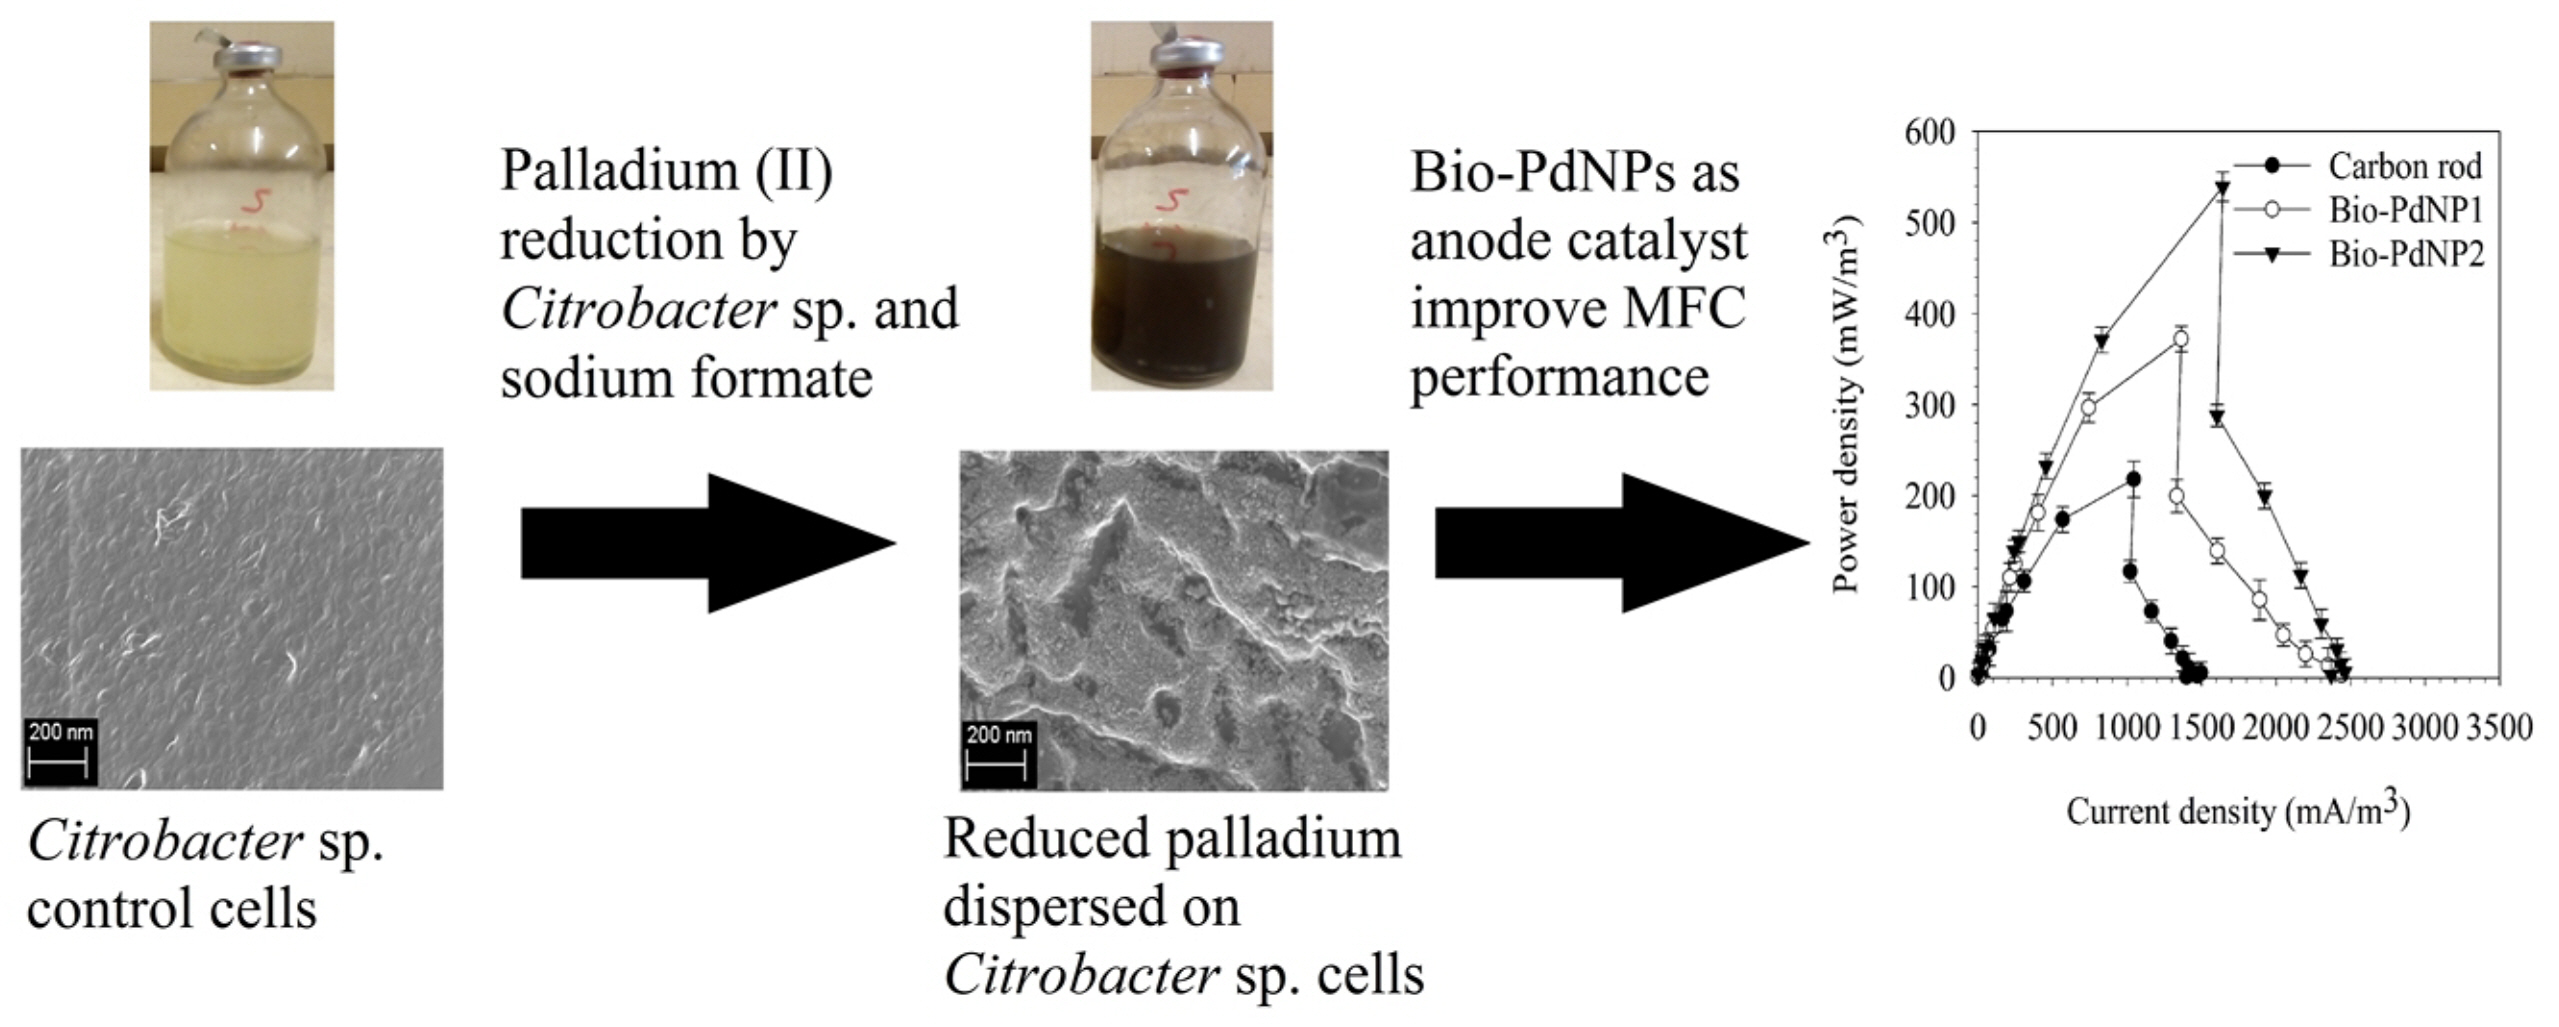 Catalysts | Free Full-Text | Synthesis of Biogenic Palladium Nanoparticles  Using Citrobacter sp. for Application as Anode Electrocatalyst in a  Microbial Fuel Cell